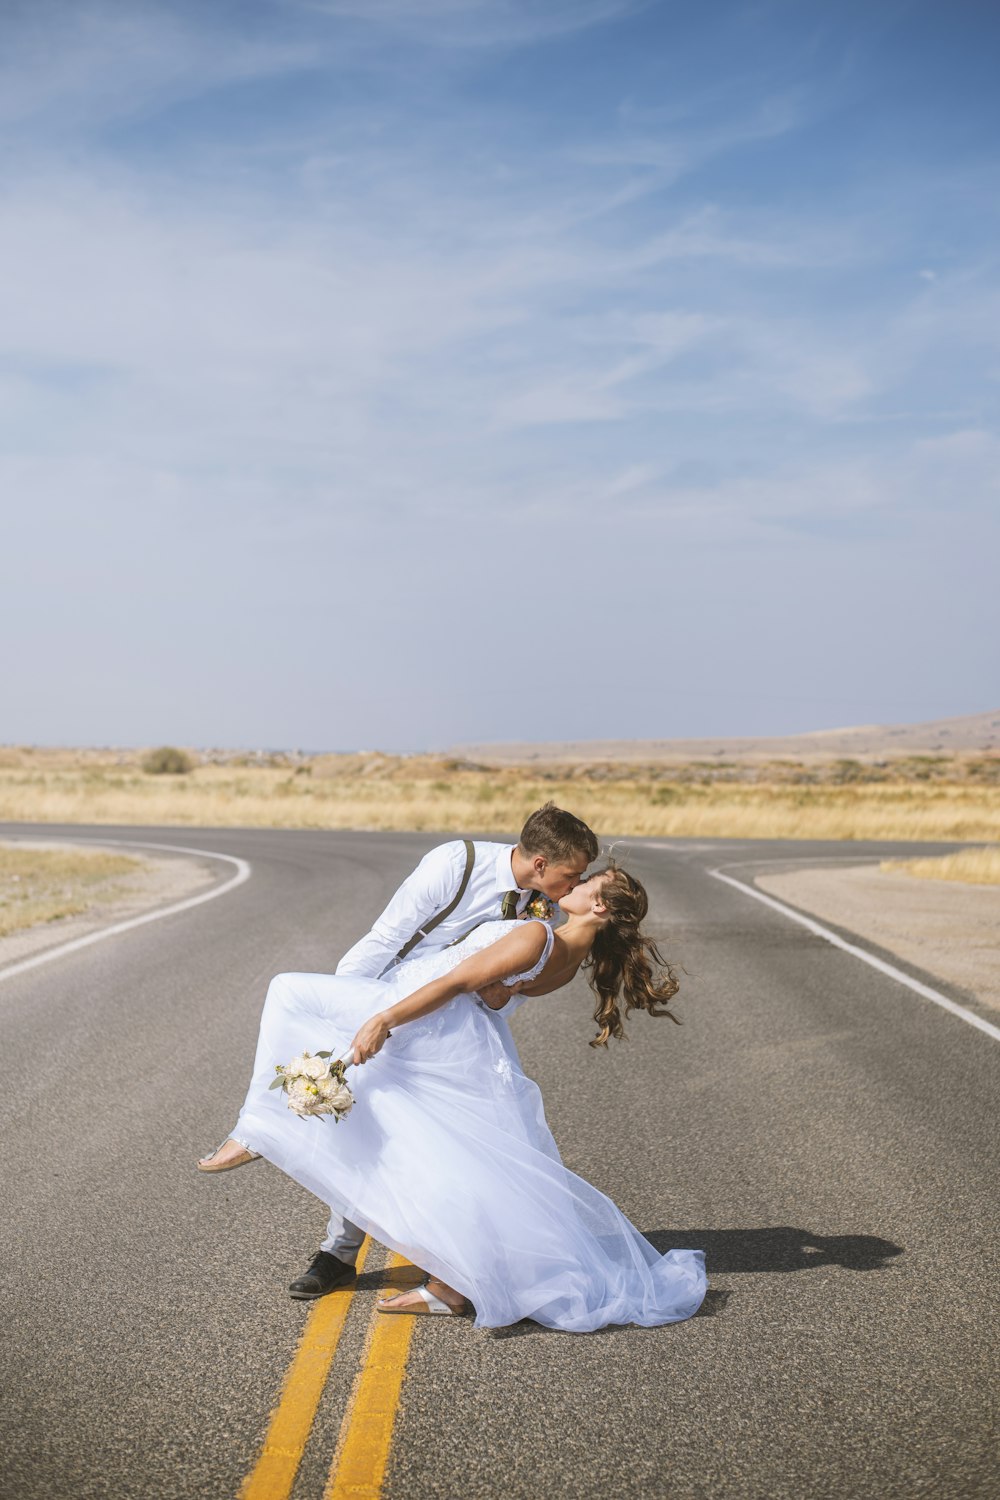 man and woman kissing on the road during daytime